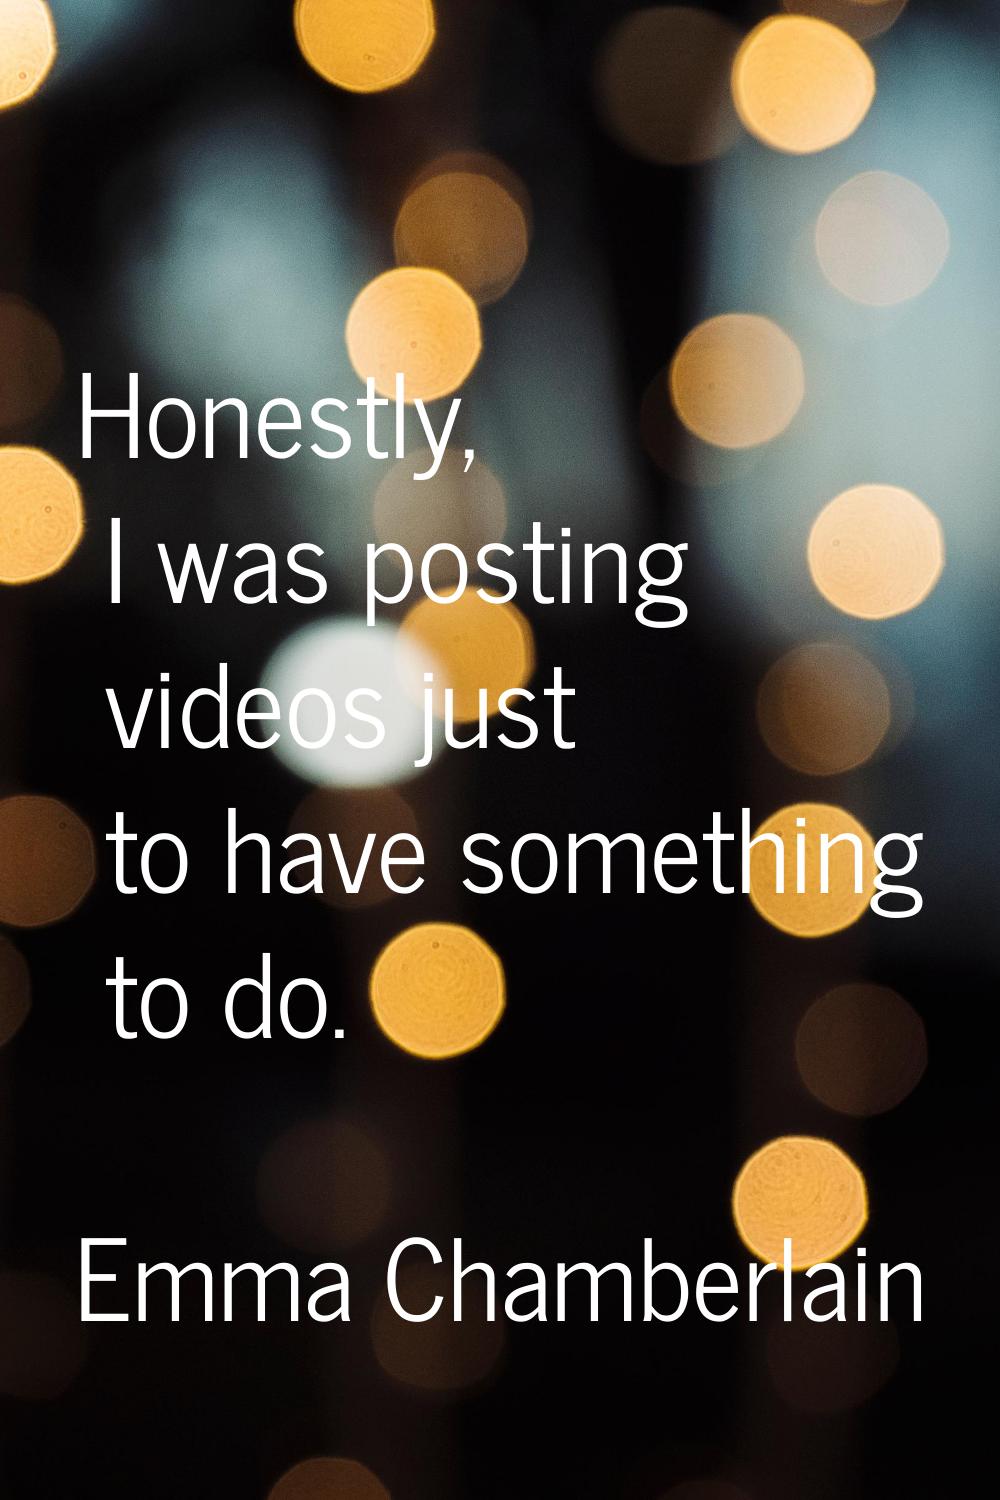 Honestly, I was posting videos just to have something to do.